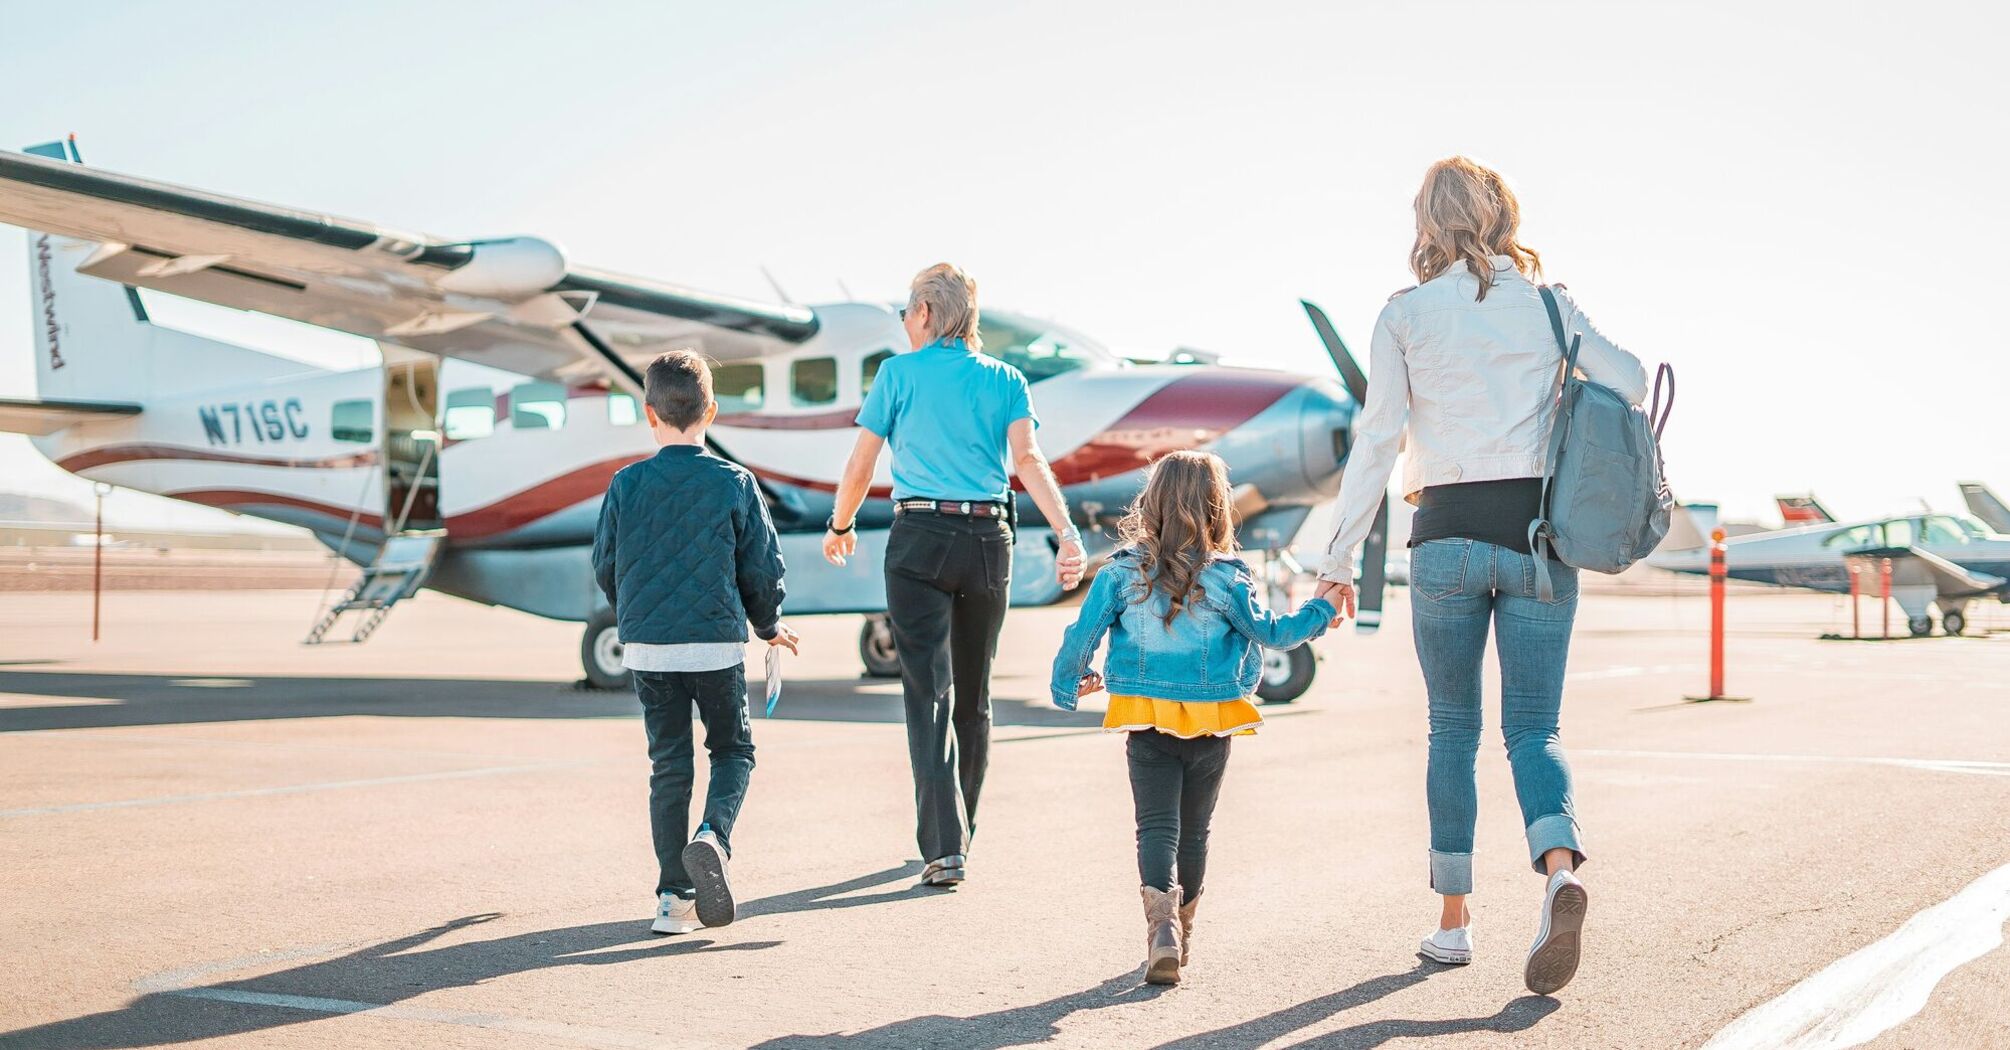 A family walking towards a small airplane on a tarmac, indicative of relaxed family travel 